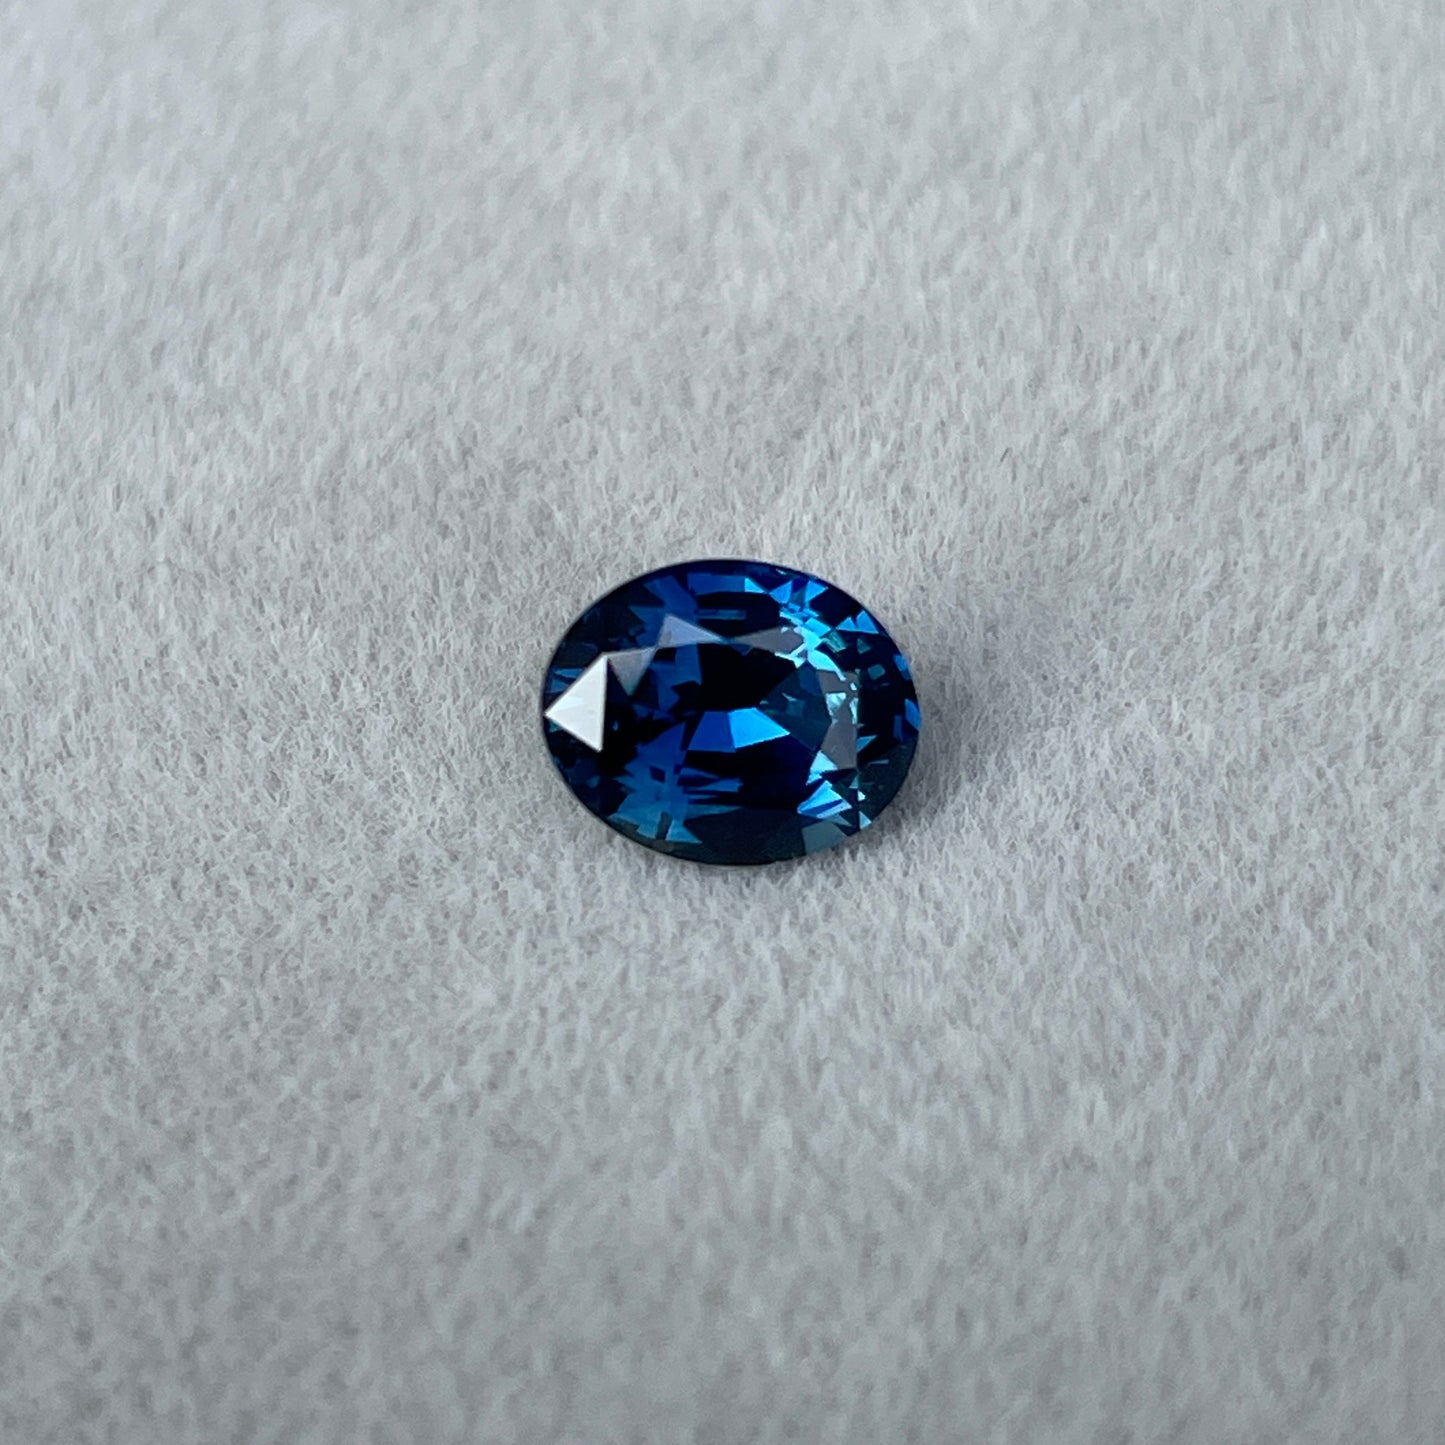 AAA Color Ceylon Blue Sapphire Loose Oval Cut Gemstone, Fine Quality Blue Sapphire Ring And Jewelry Making Gemstone 1.25 Ct - NASHGEMS